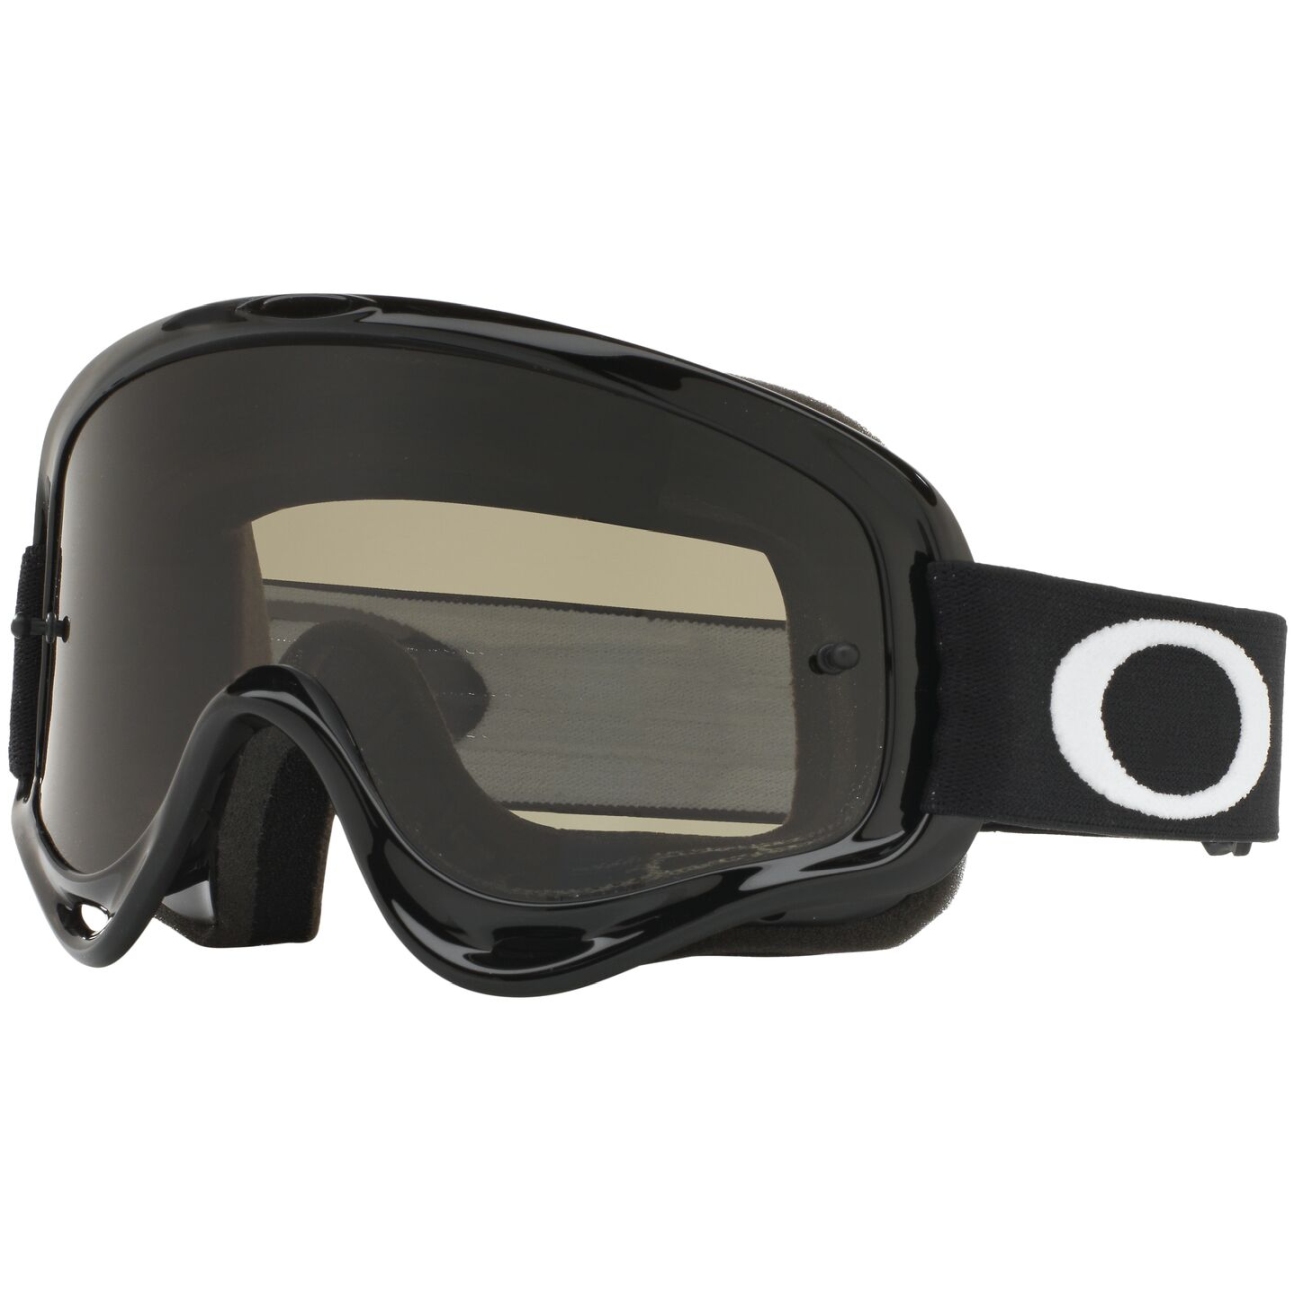 Picture of Oakley O-Frame XS MX Goggles - Jet Black/Dark Grey - OO7030-21